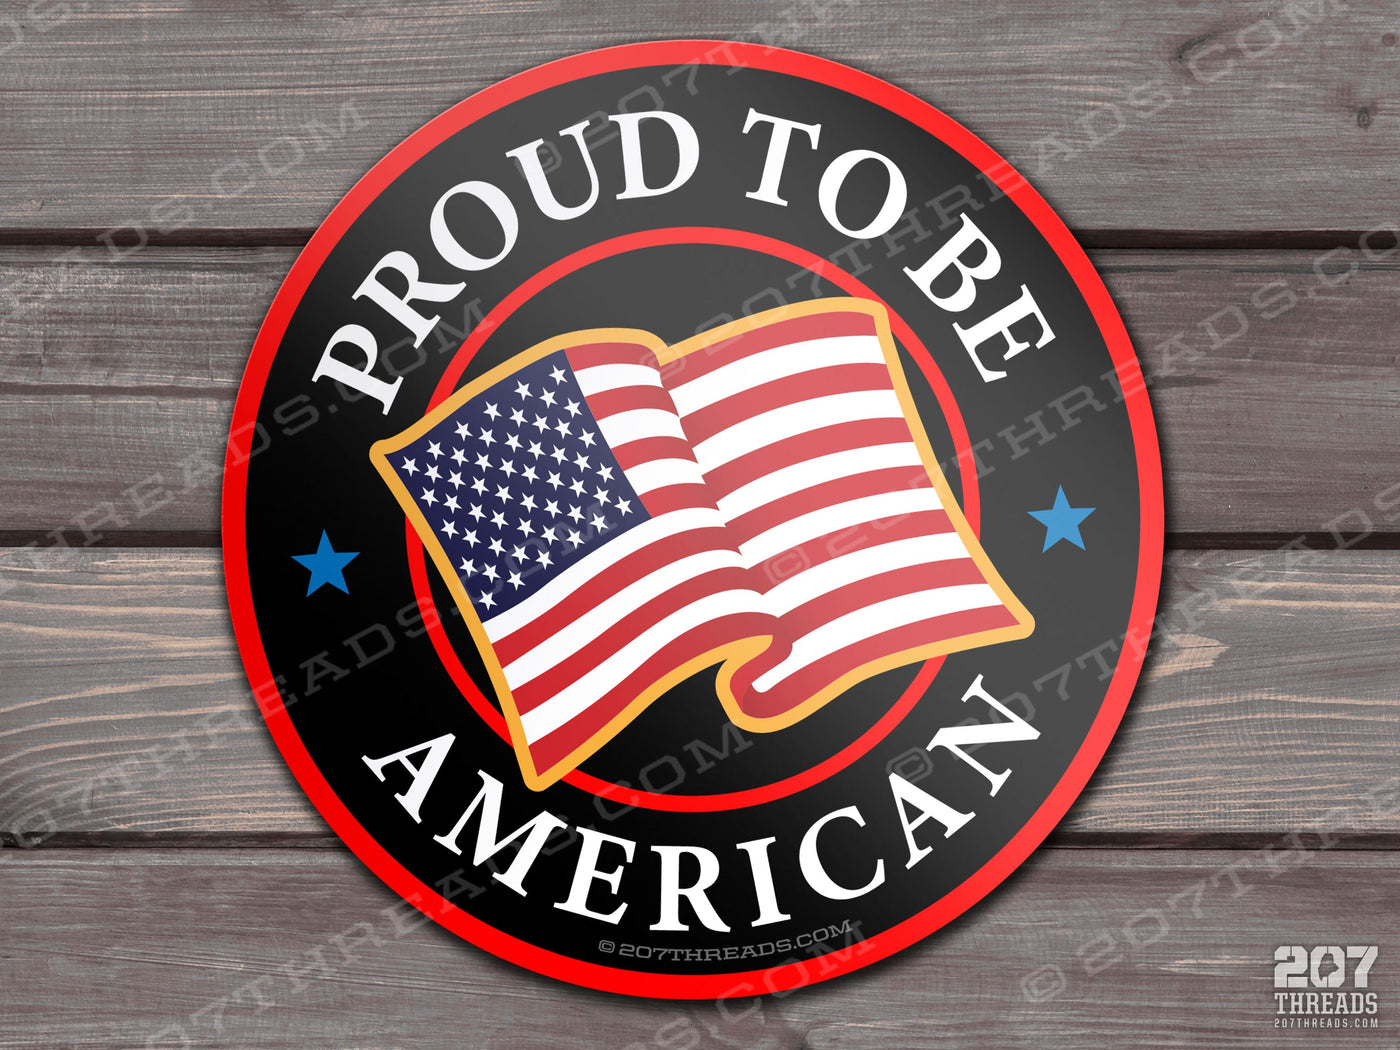 Proud To Be An American Waving American Flag Patriotic USA 1776 Stars & Stripes Red White & Blue, Patriotism 2nd Amendment Decals & Stickers 